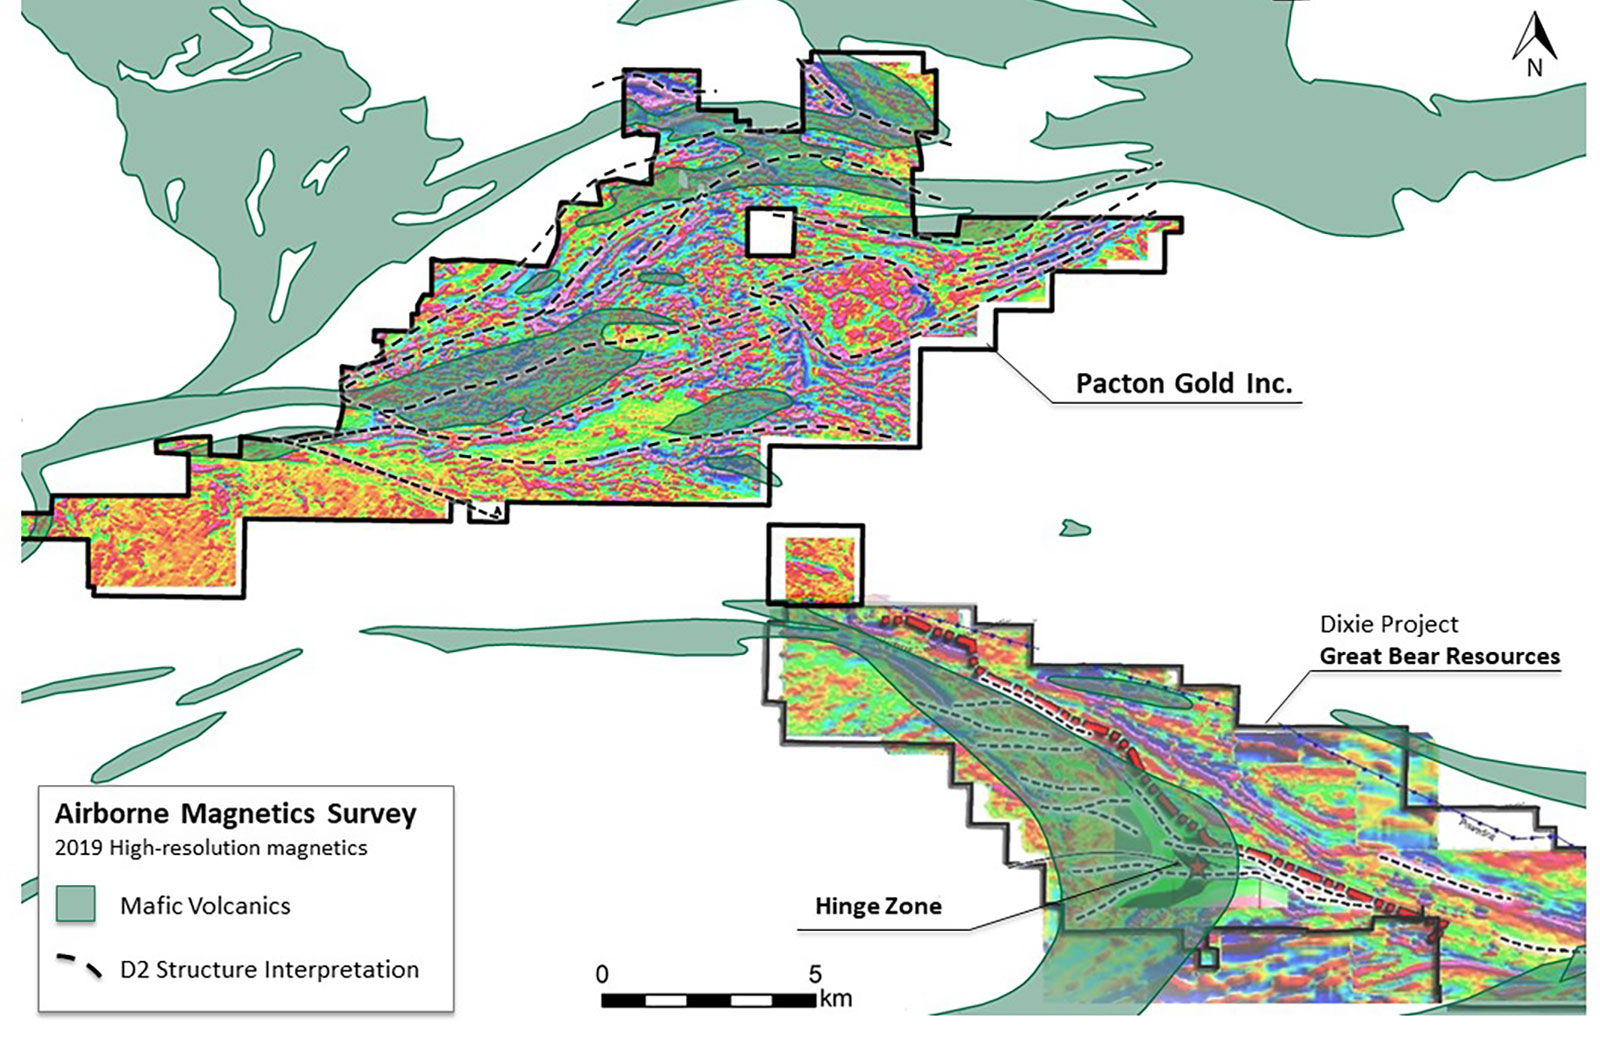 Pacton Gold’s Red Lake project with the high-resolution airborne magnetics survey and Great Bear Resources Dixie project magnetics survey.